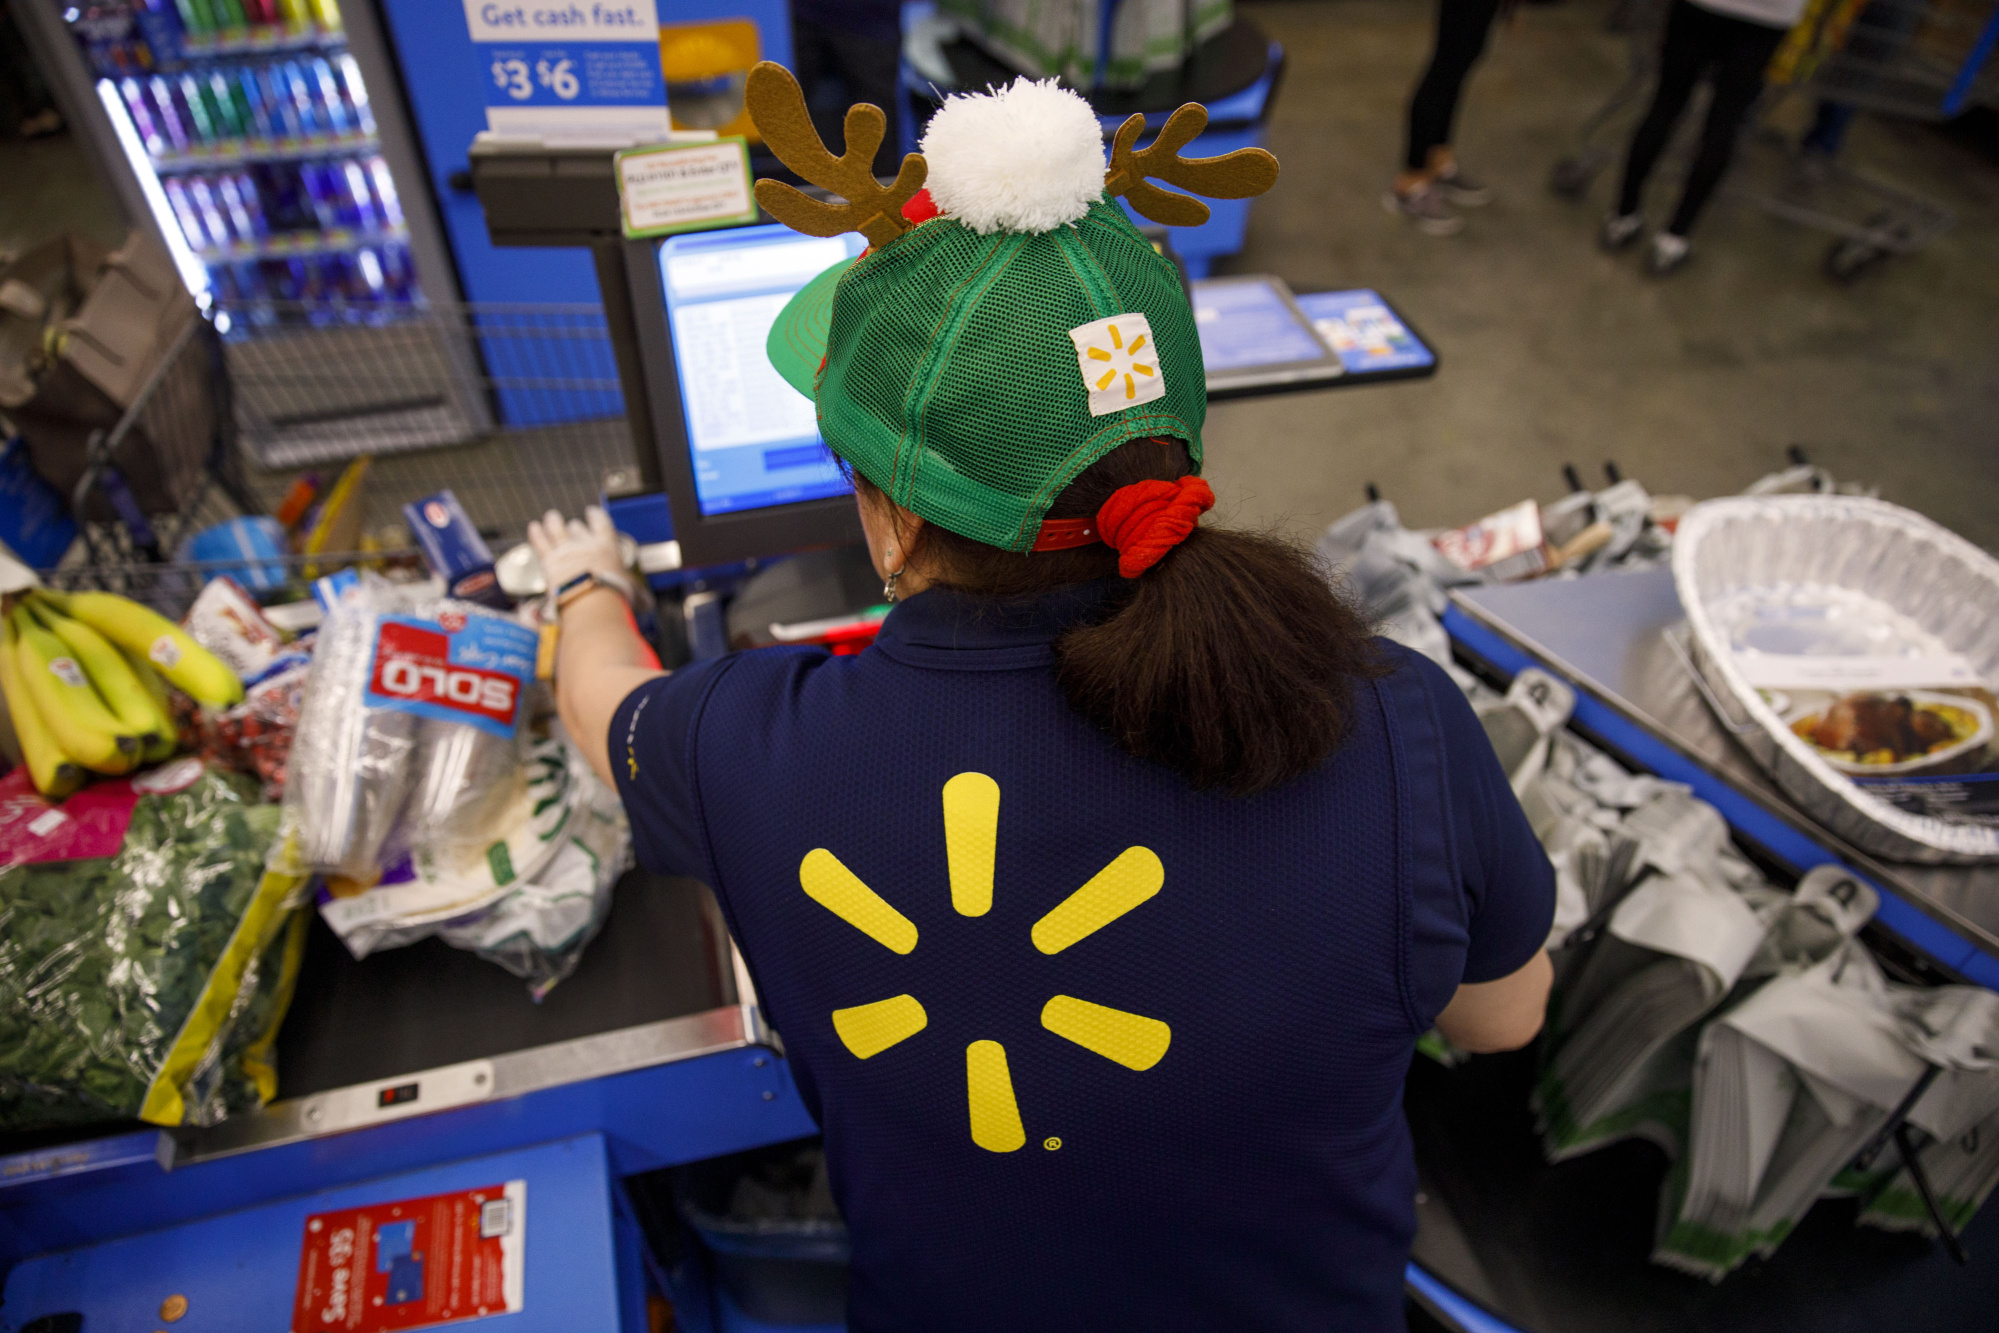 Walmart to make 67% of workers full-time by Jan. 31